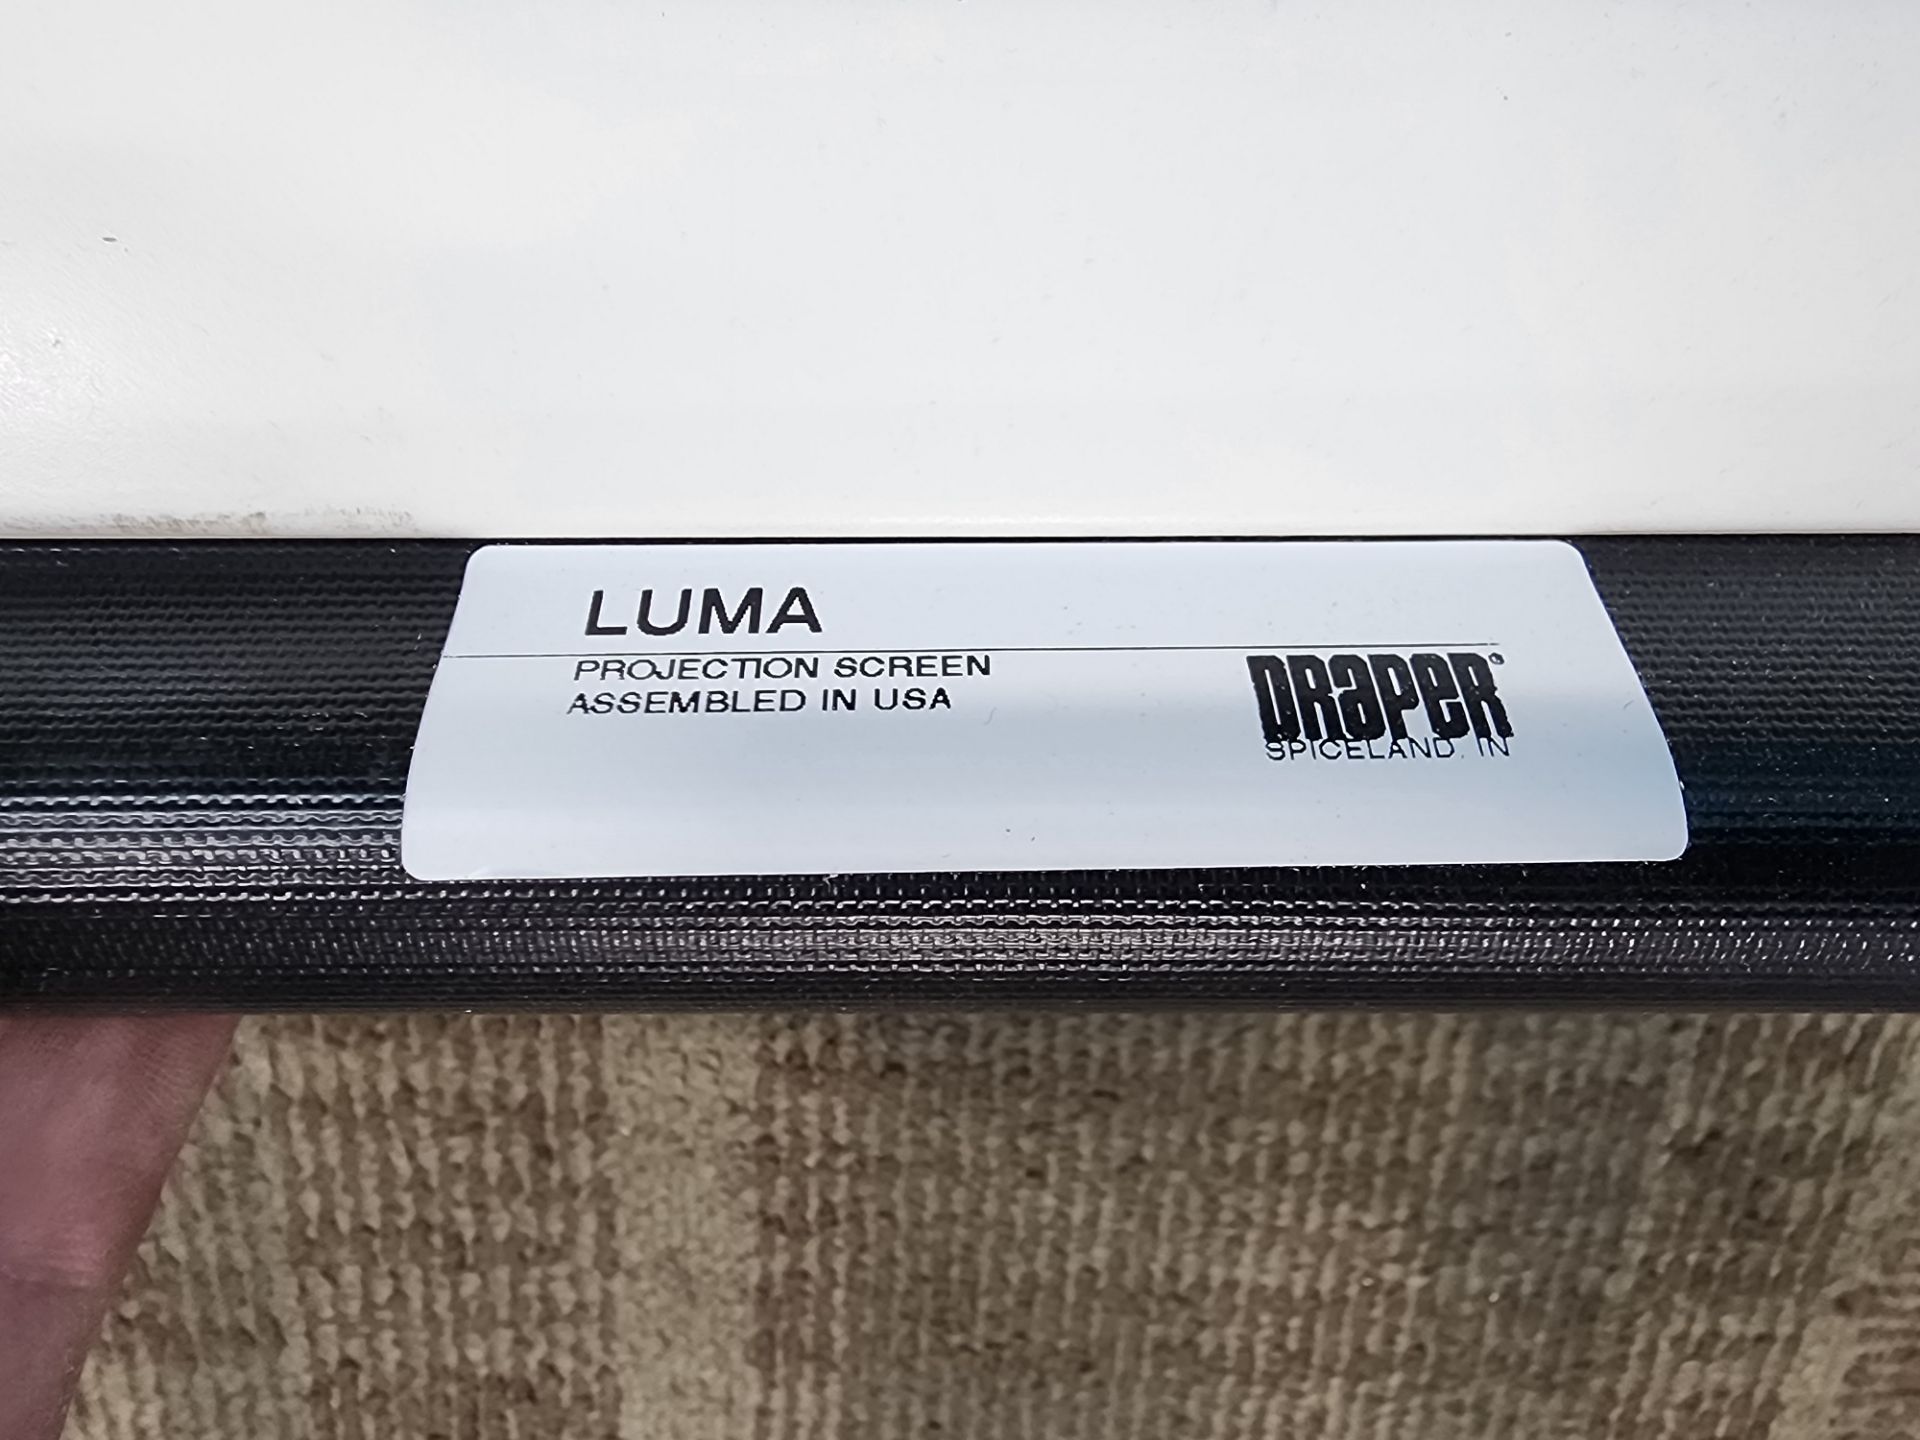 Draper Luma Manual Projector Screen, Max Image Width 96" Wide, Can be wall or ceiling mounted - Image 3 of 3